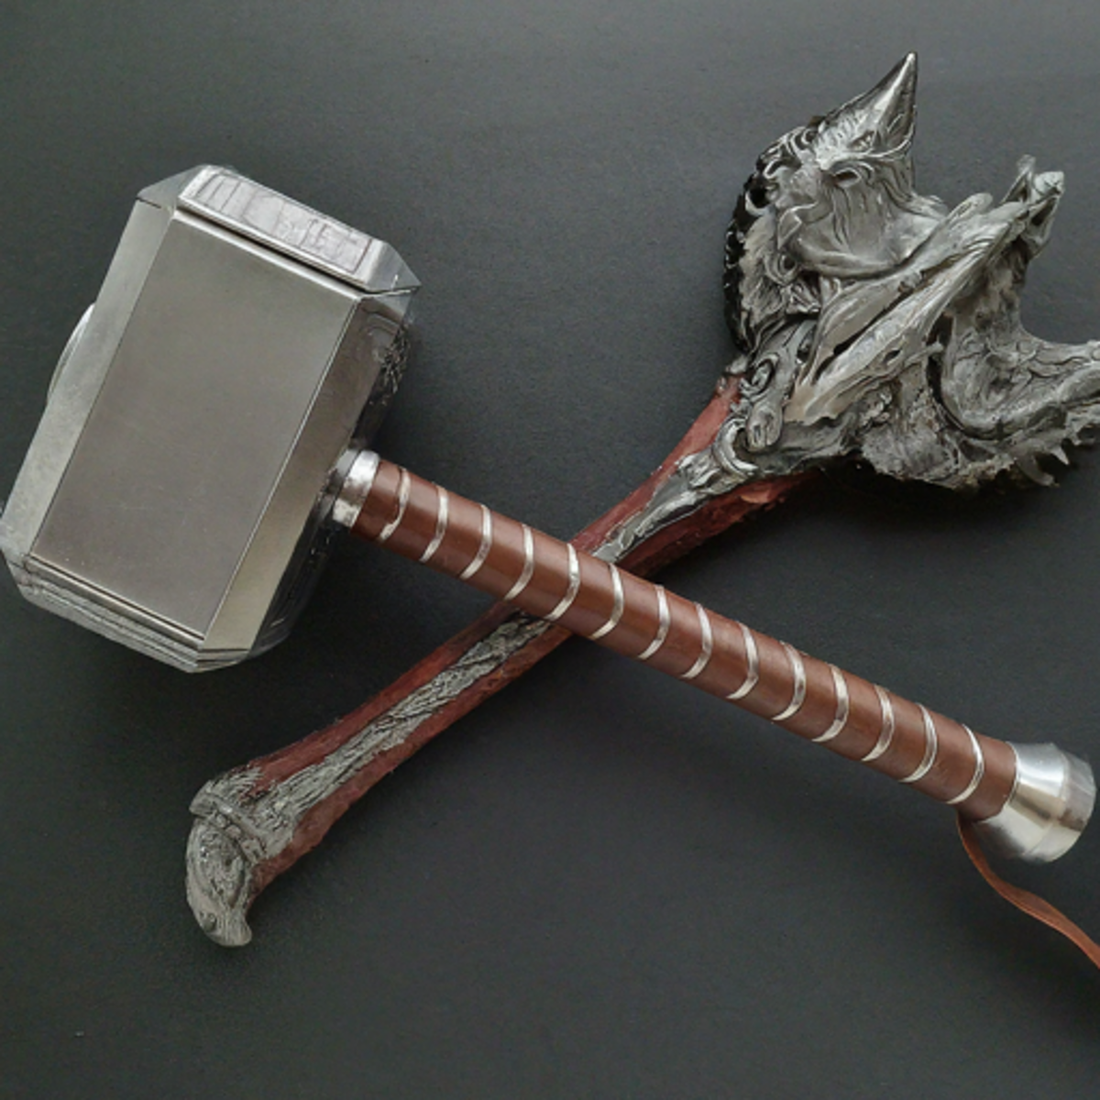 Which is More Powerful Stormbreaker or Mjolnir?